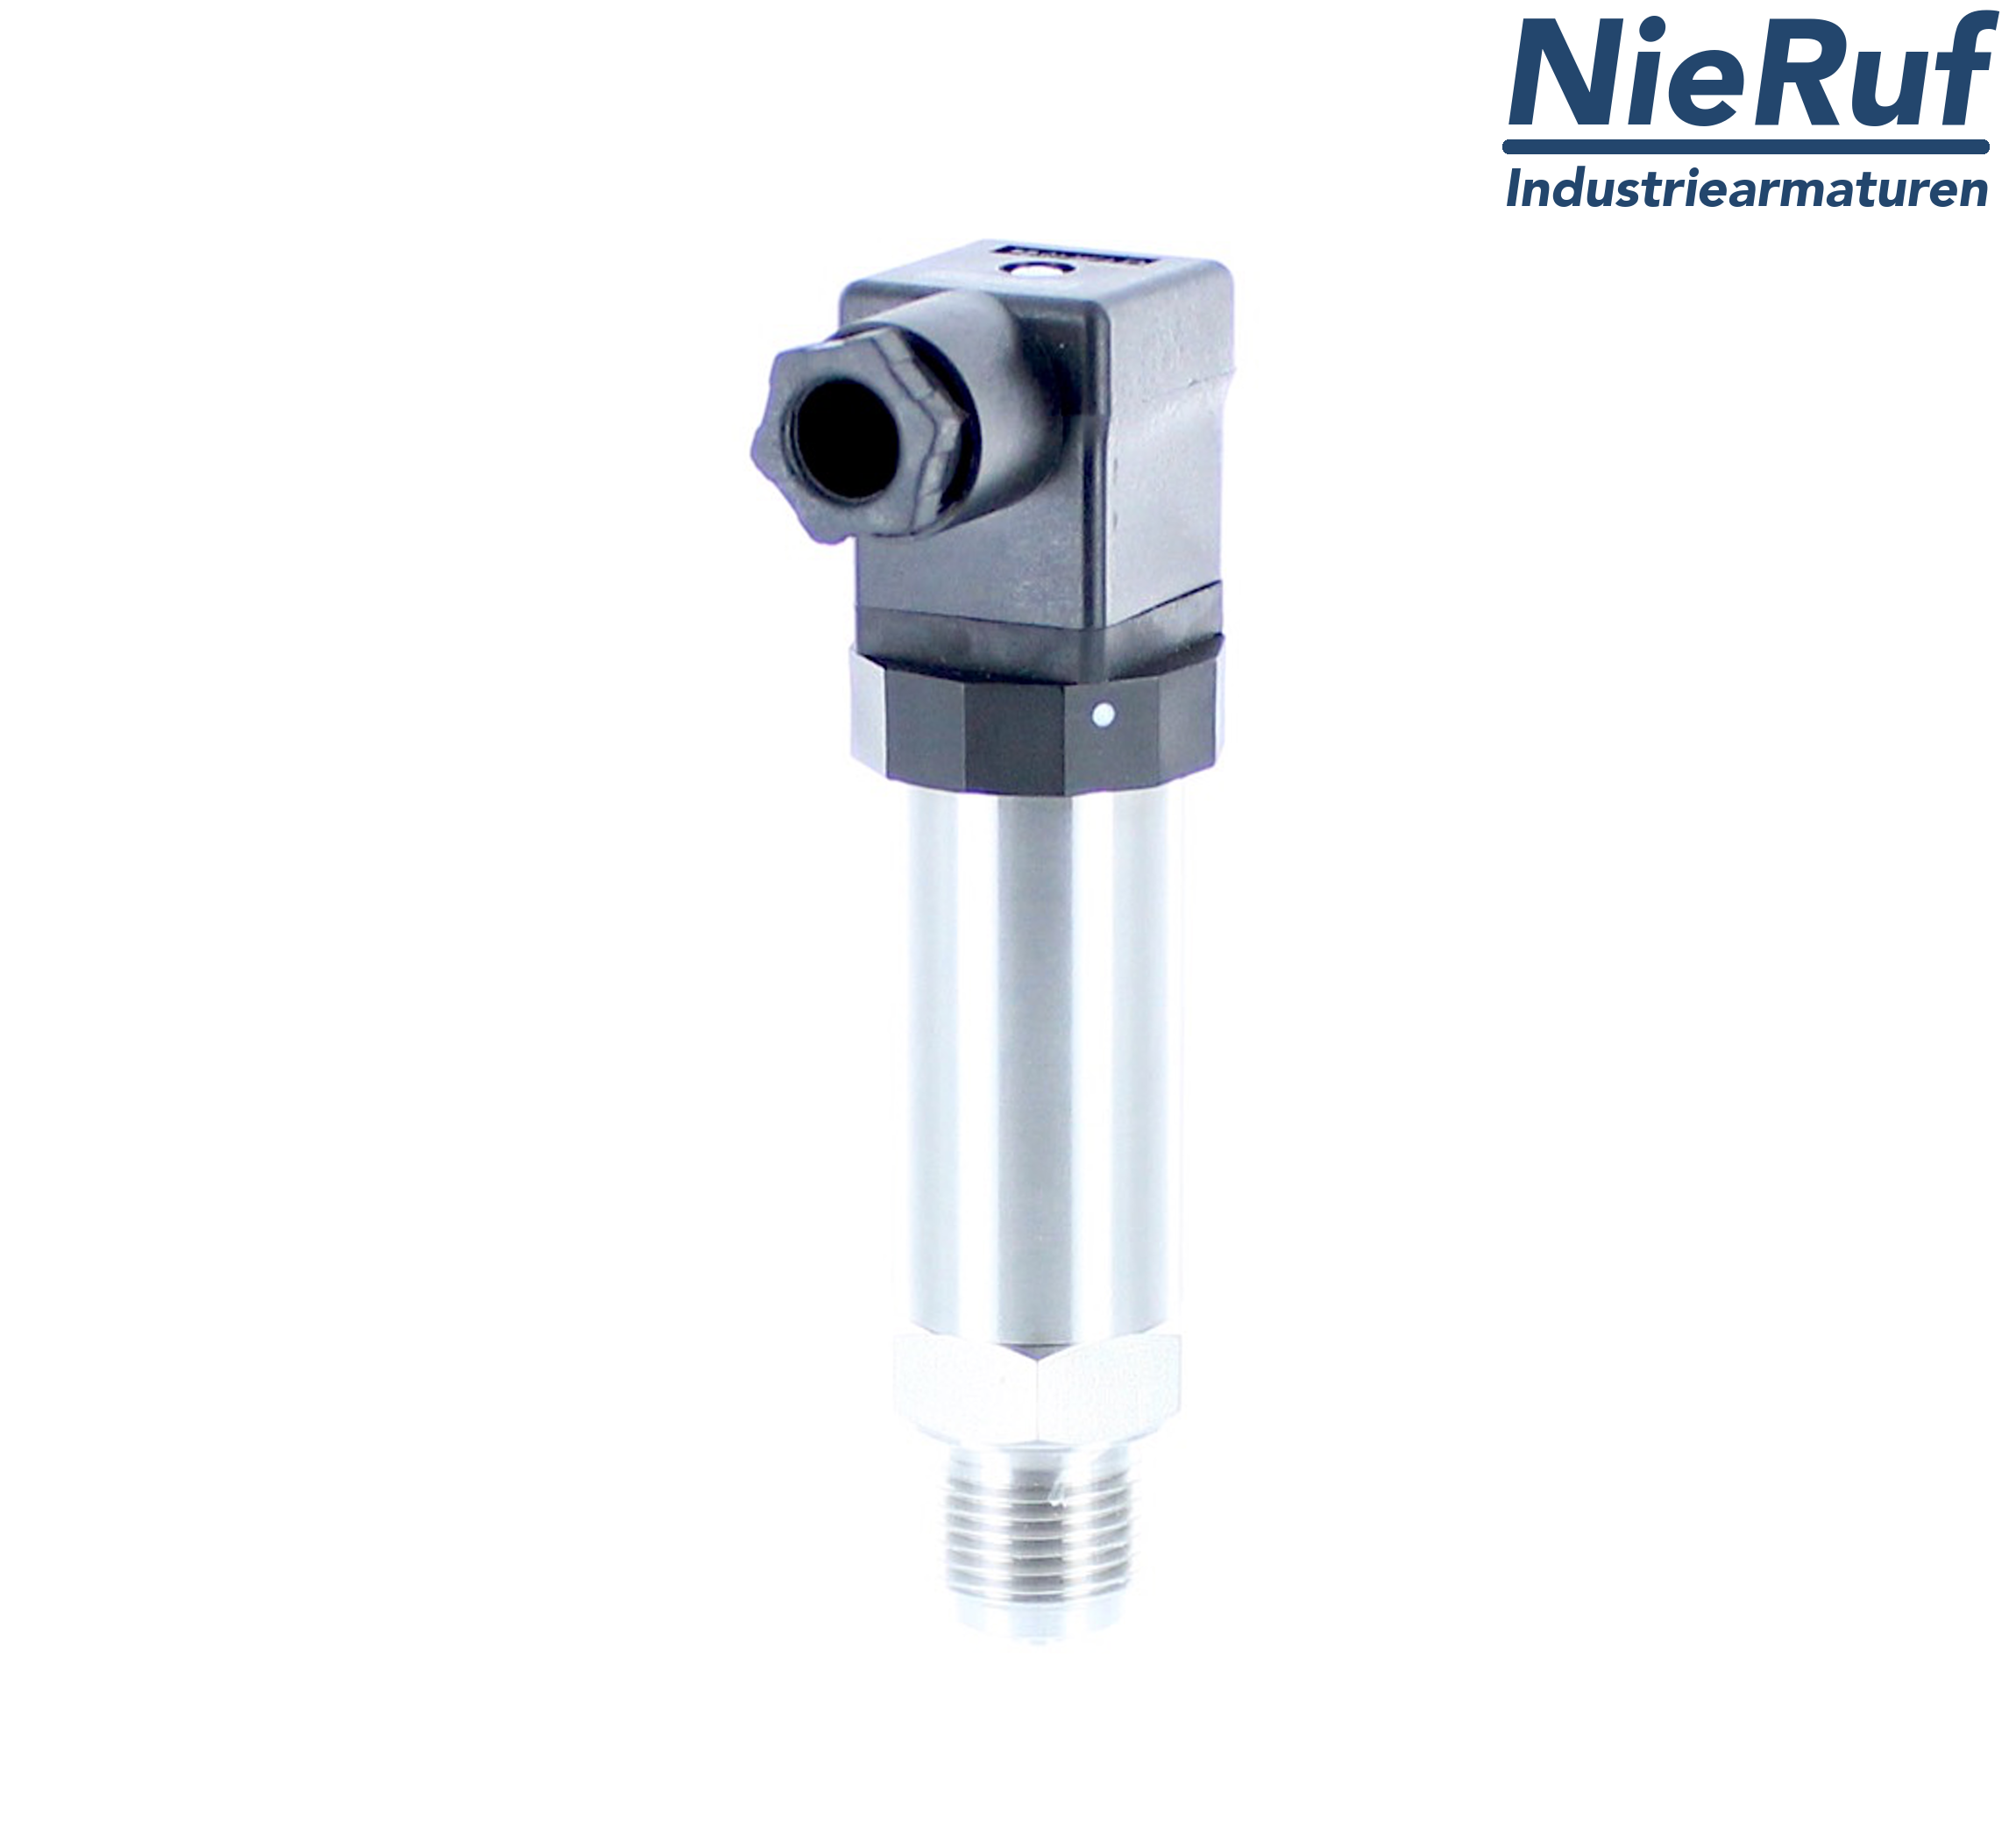 pressure sensor G 1/4" B DS01 stainless steel 2-wire: 4-20mA FPM 0,0 - 10,0 bar